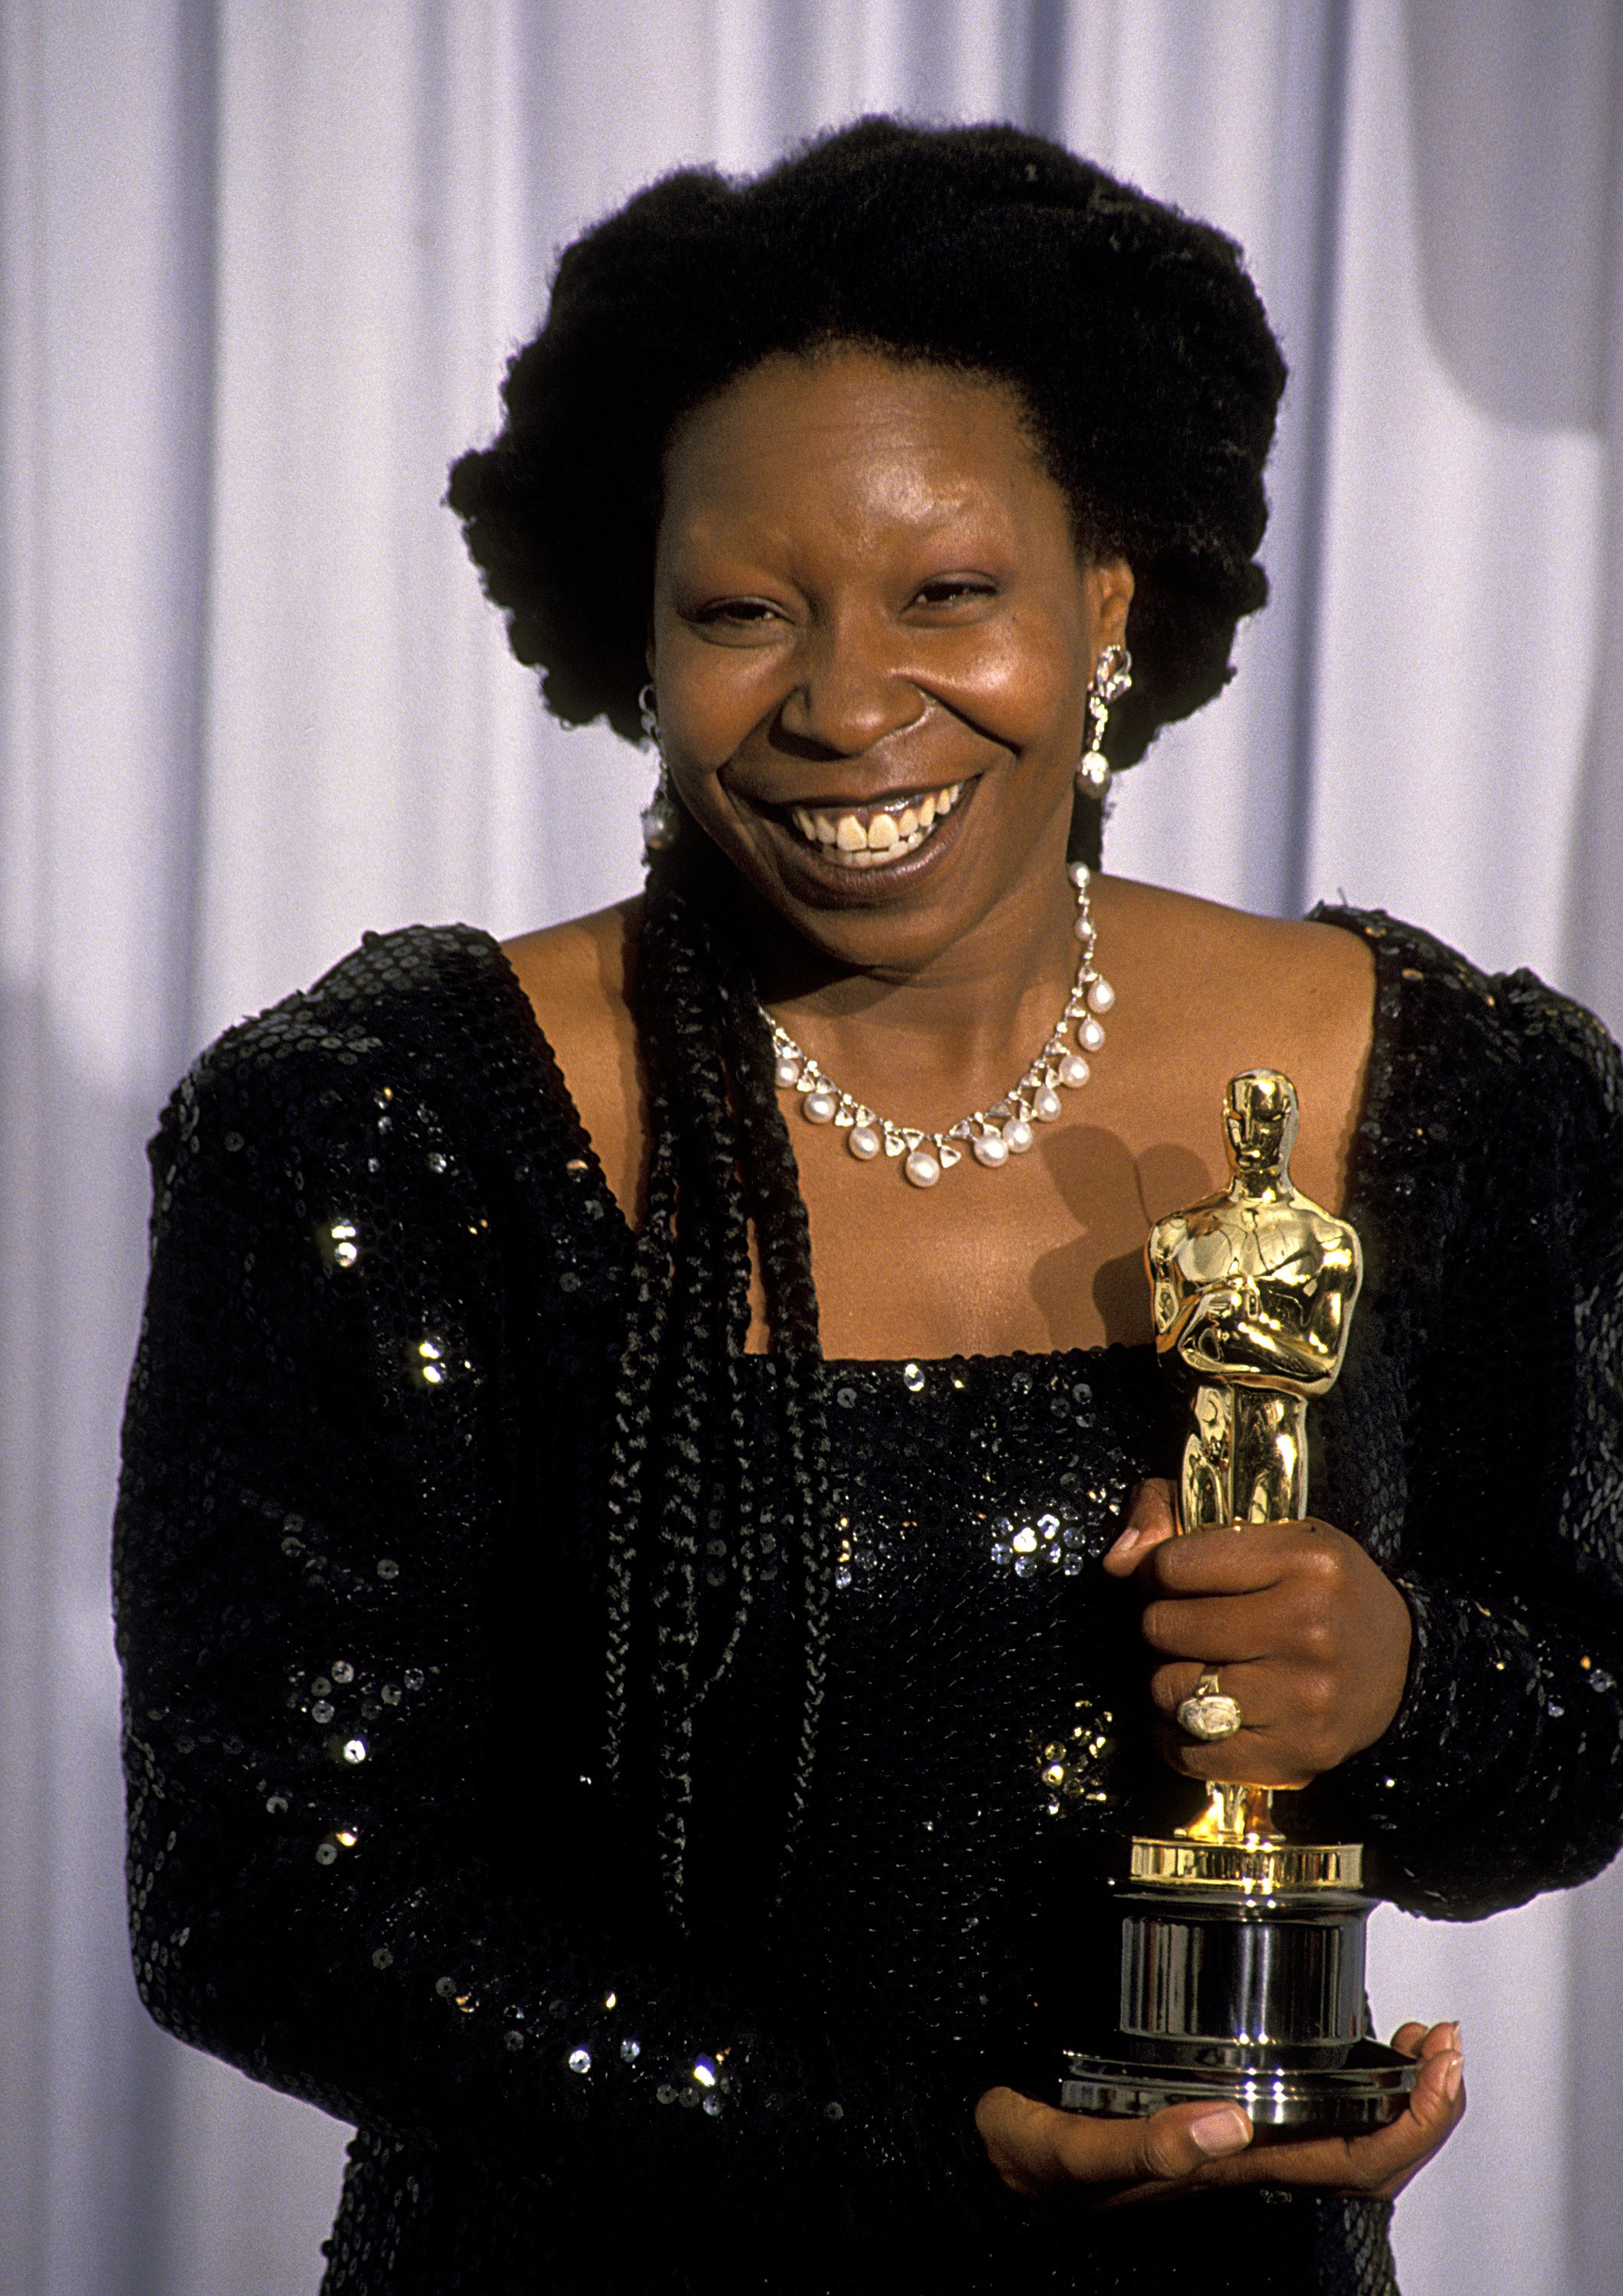 Whoopi Goldberg, with her Oscar for Best Supporting Actress, at the 63rd Annual Academy Awards at the Shrine Auditorium in Los Angeles, California, 25th March 1991 | Source: Getty Images